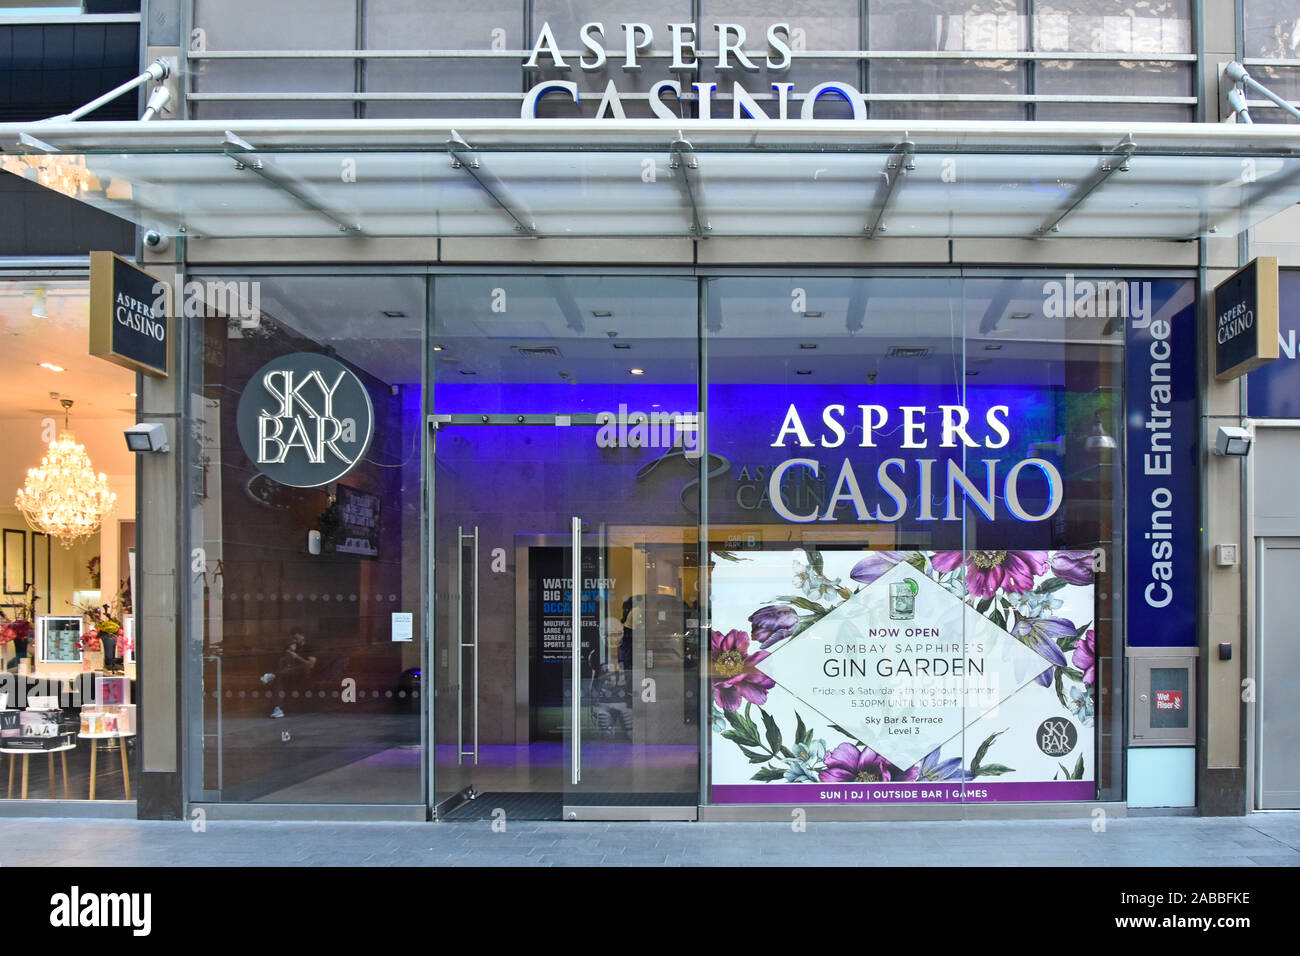 Entrance to Aspers 24/7 casino offering gambling table games slot machines restaurants bars at Westfield Stratford City London shopping centre mall UK Stock Photo